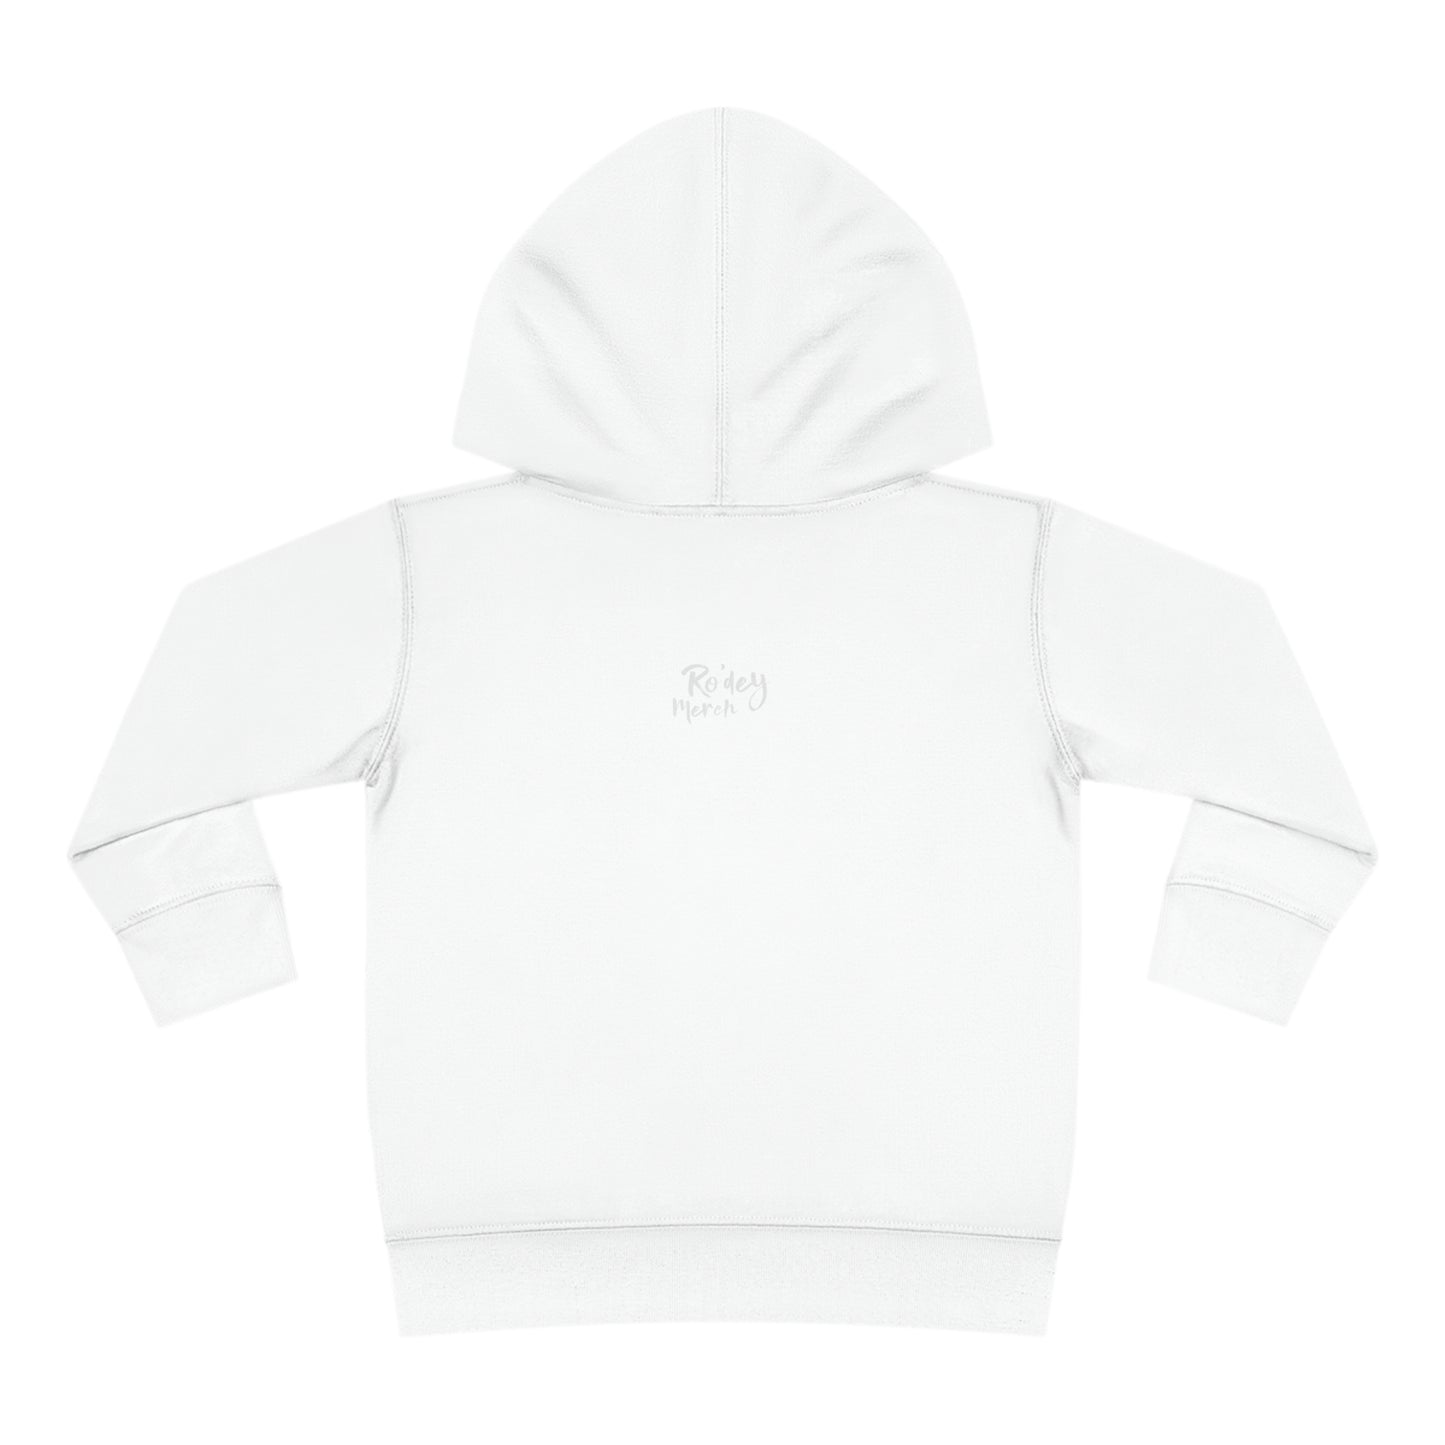 The R'odey Show (Ro'dey) Toddler Pullover Fleece Hoodie